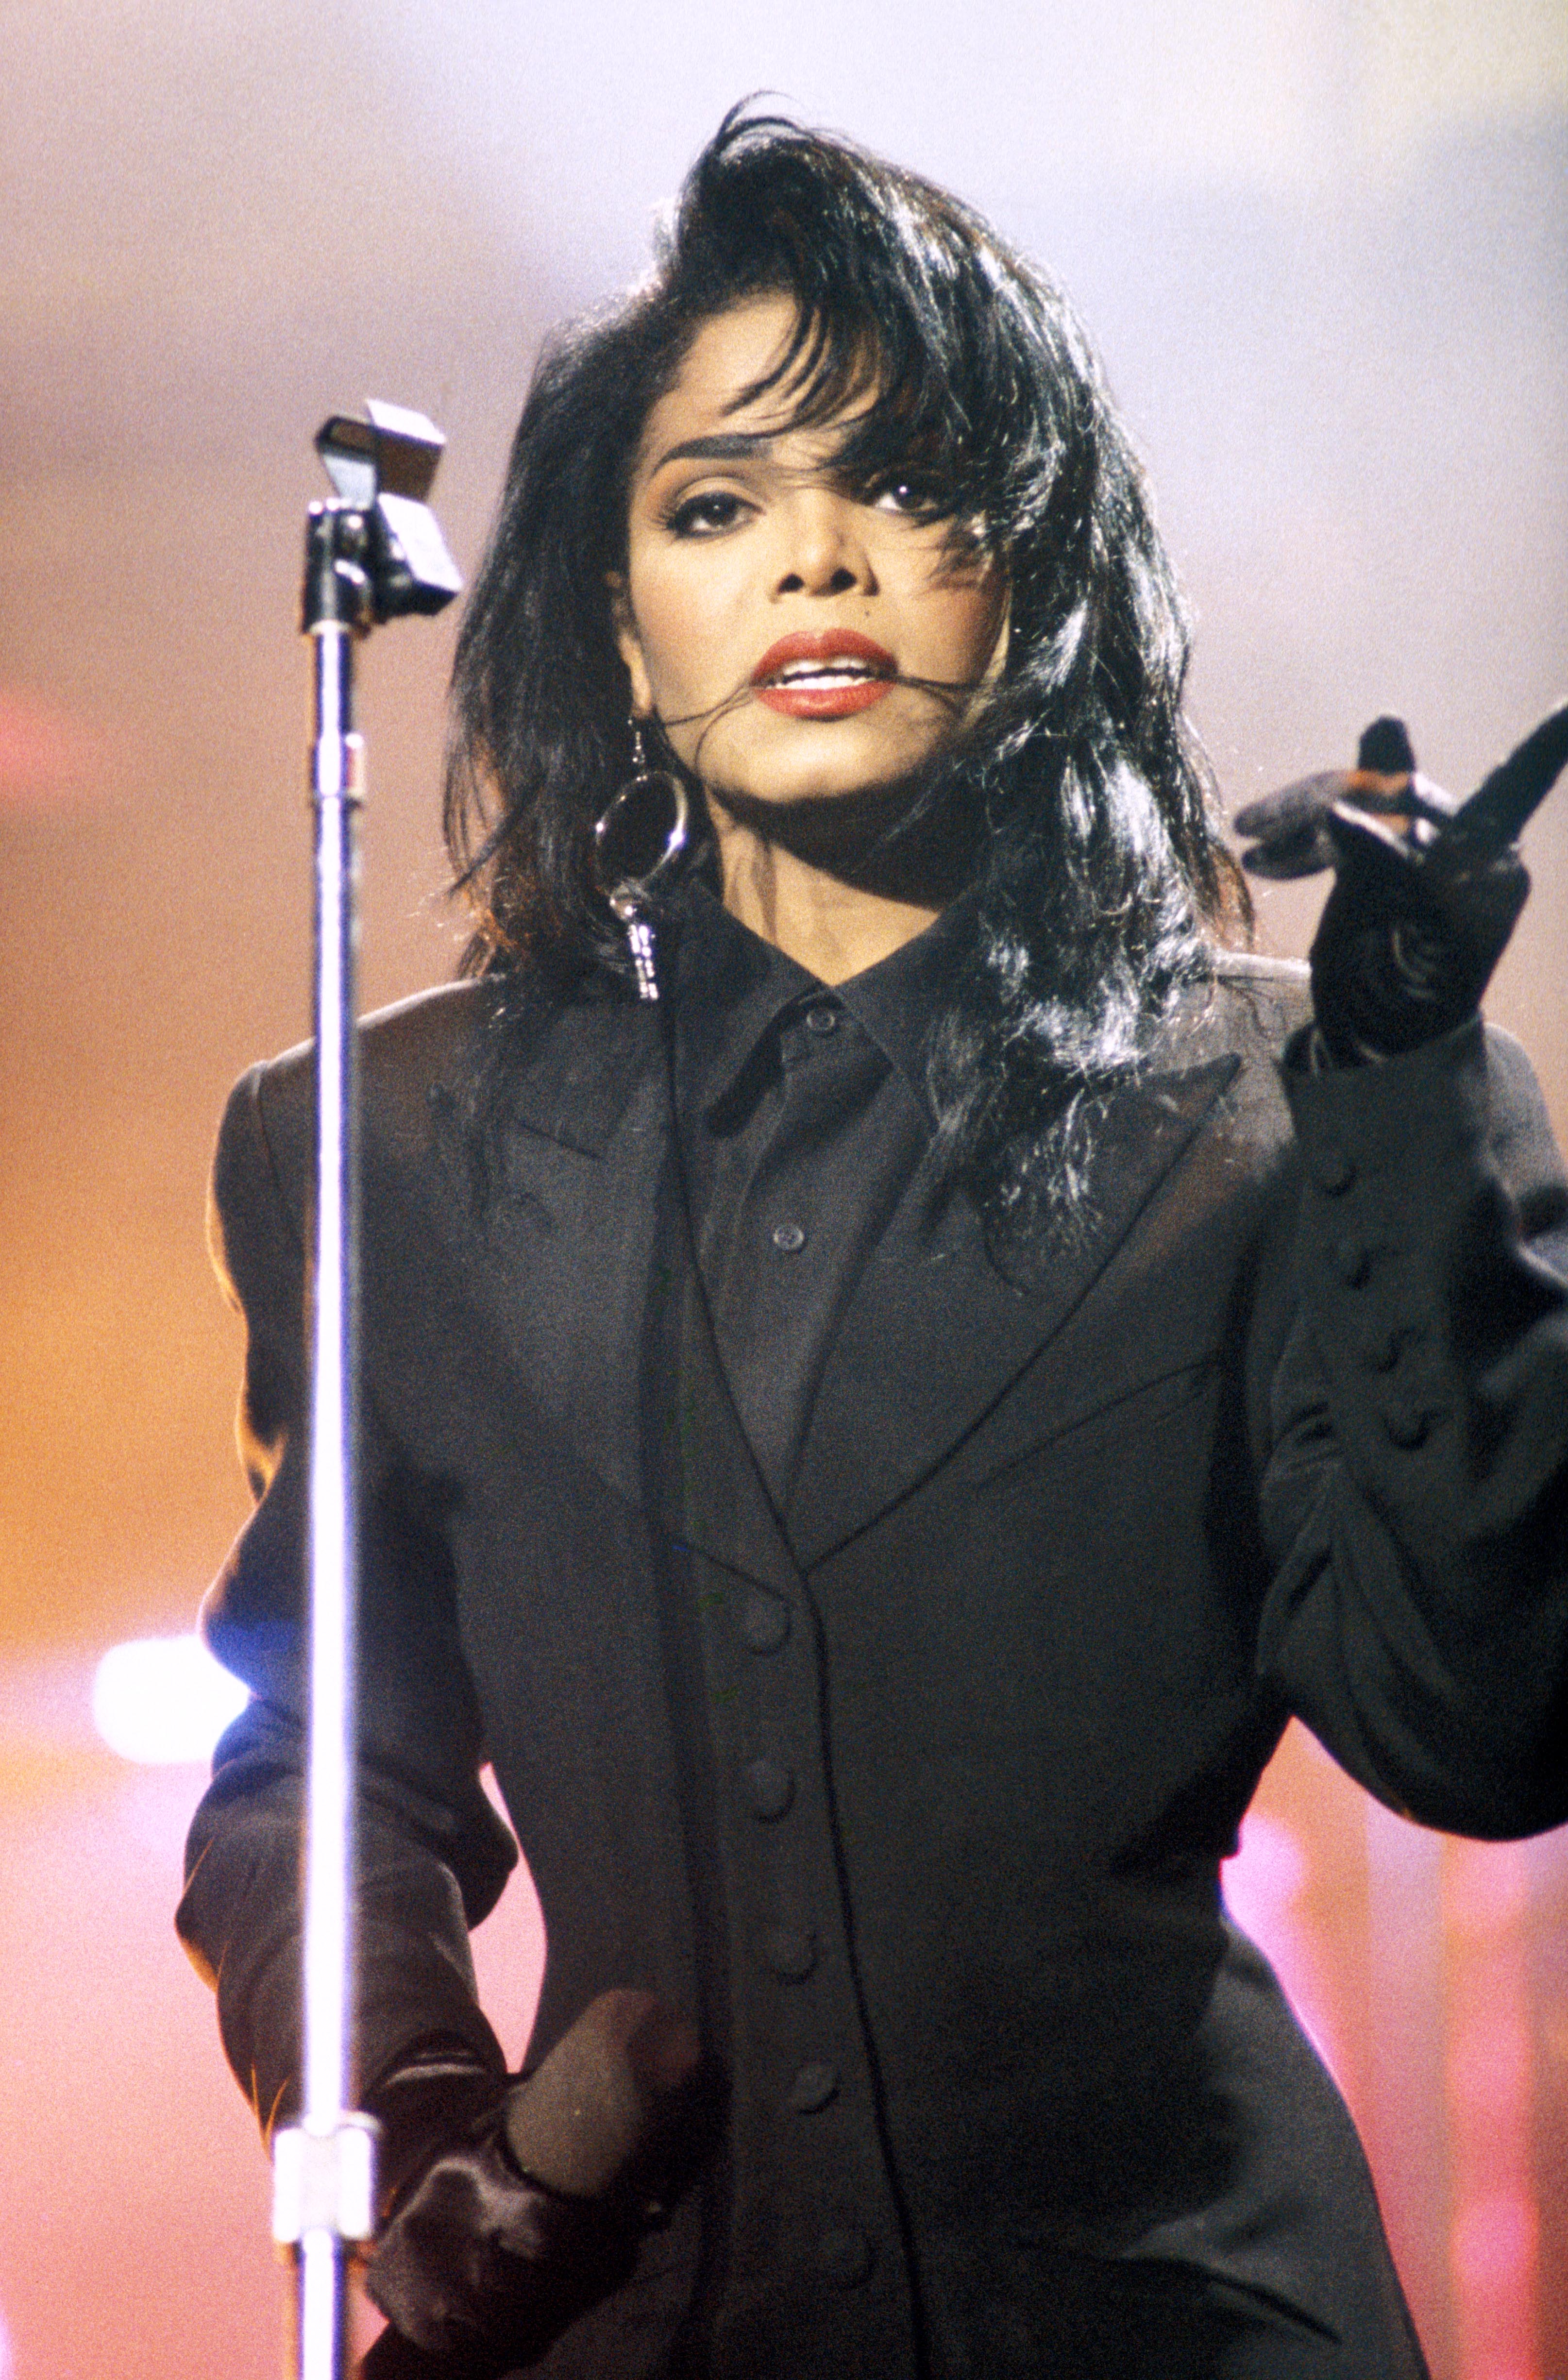 Janet is the sister of king of pop Michael Jackson